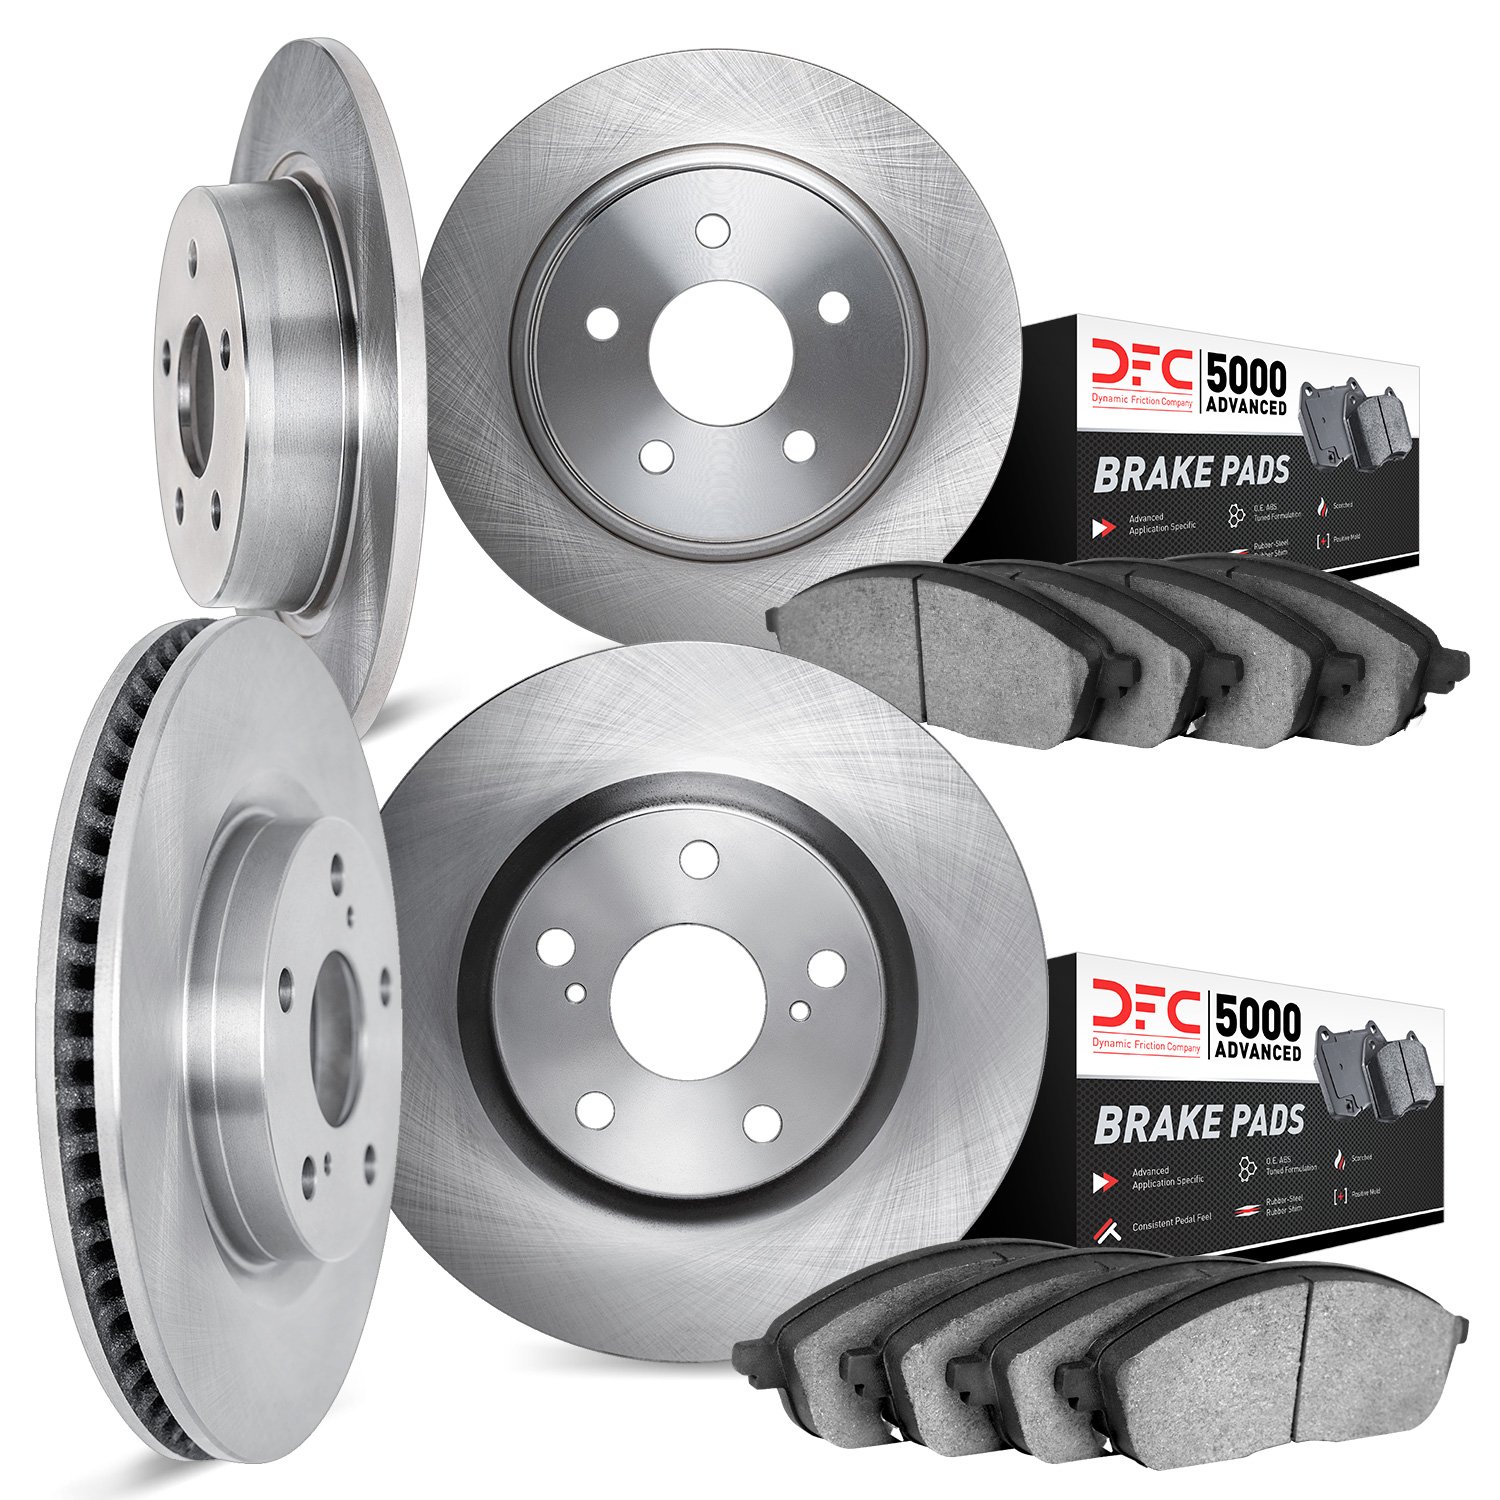 6504-55154 Brake Rotors w/5000 Advanced Brake Pads Kit, Fits Select Ford/Lincoln/Mercury/Mazda, Position: Front and Rear